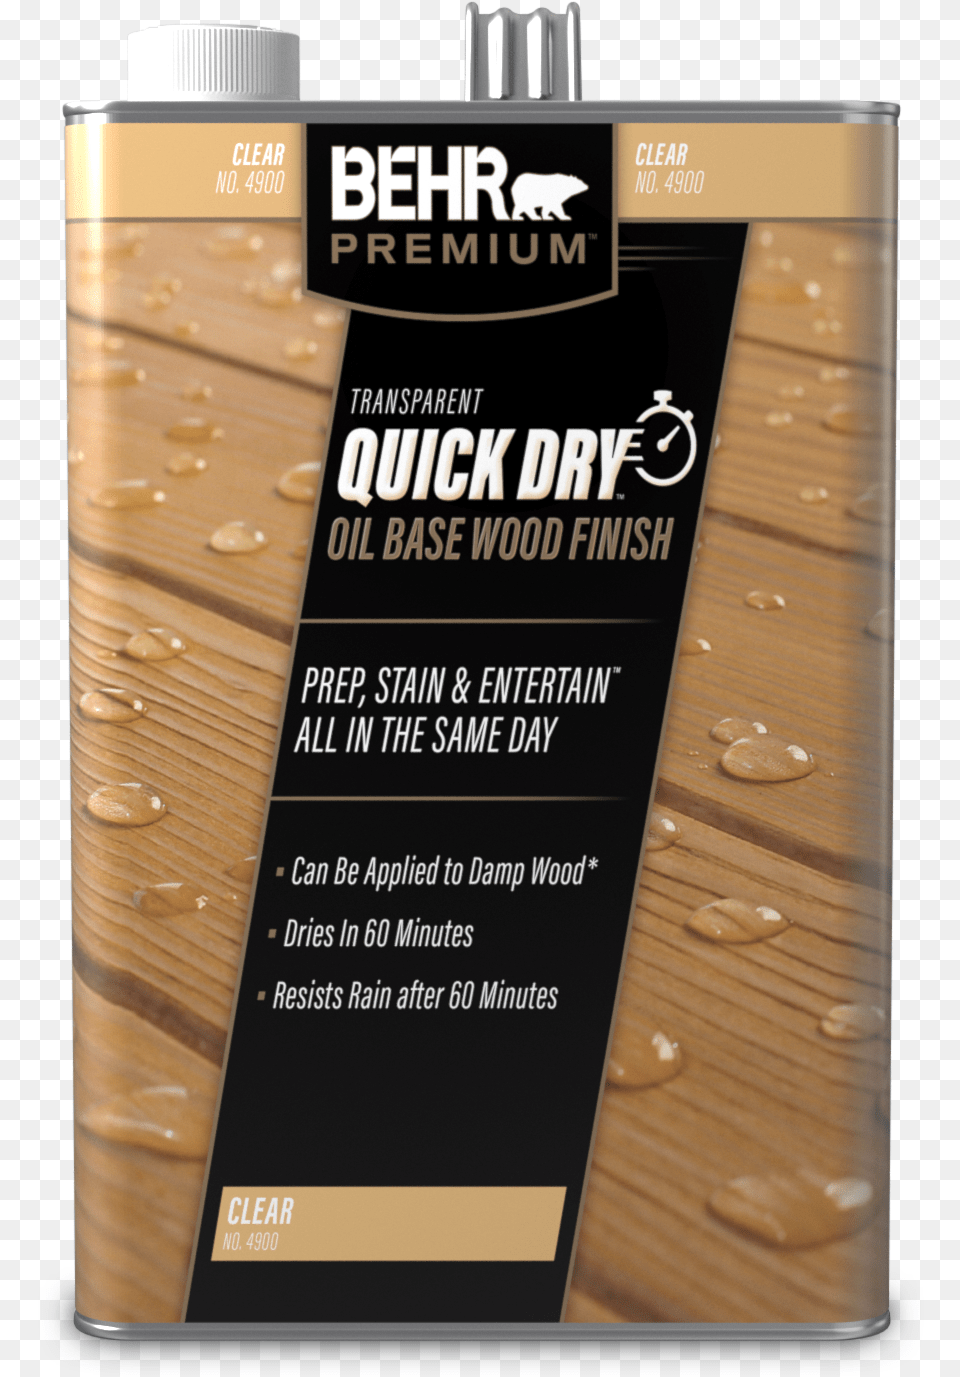 Clear Deck Stain, Advertisement, Poster, Bottle Png Image